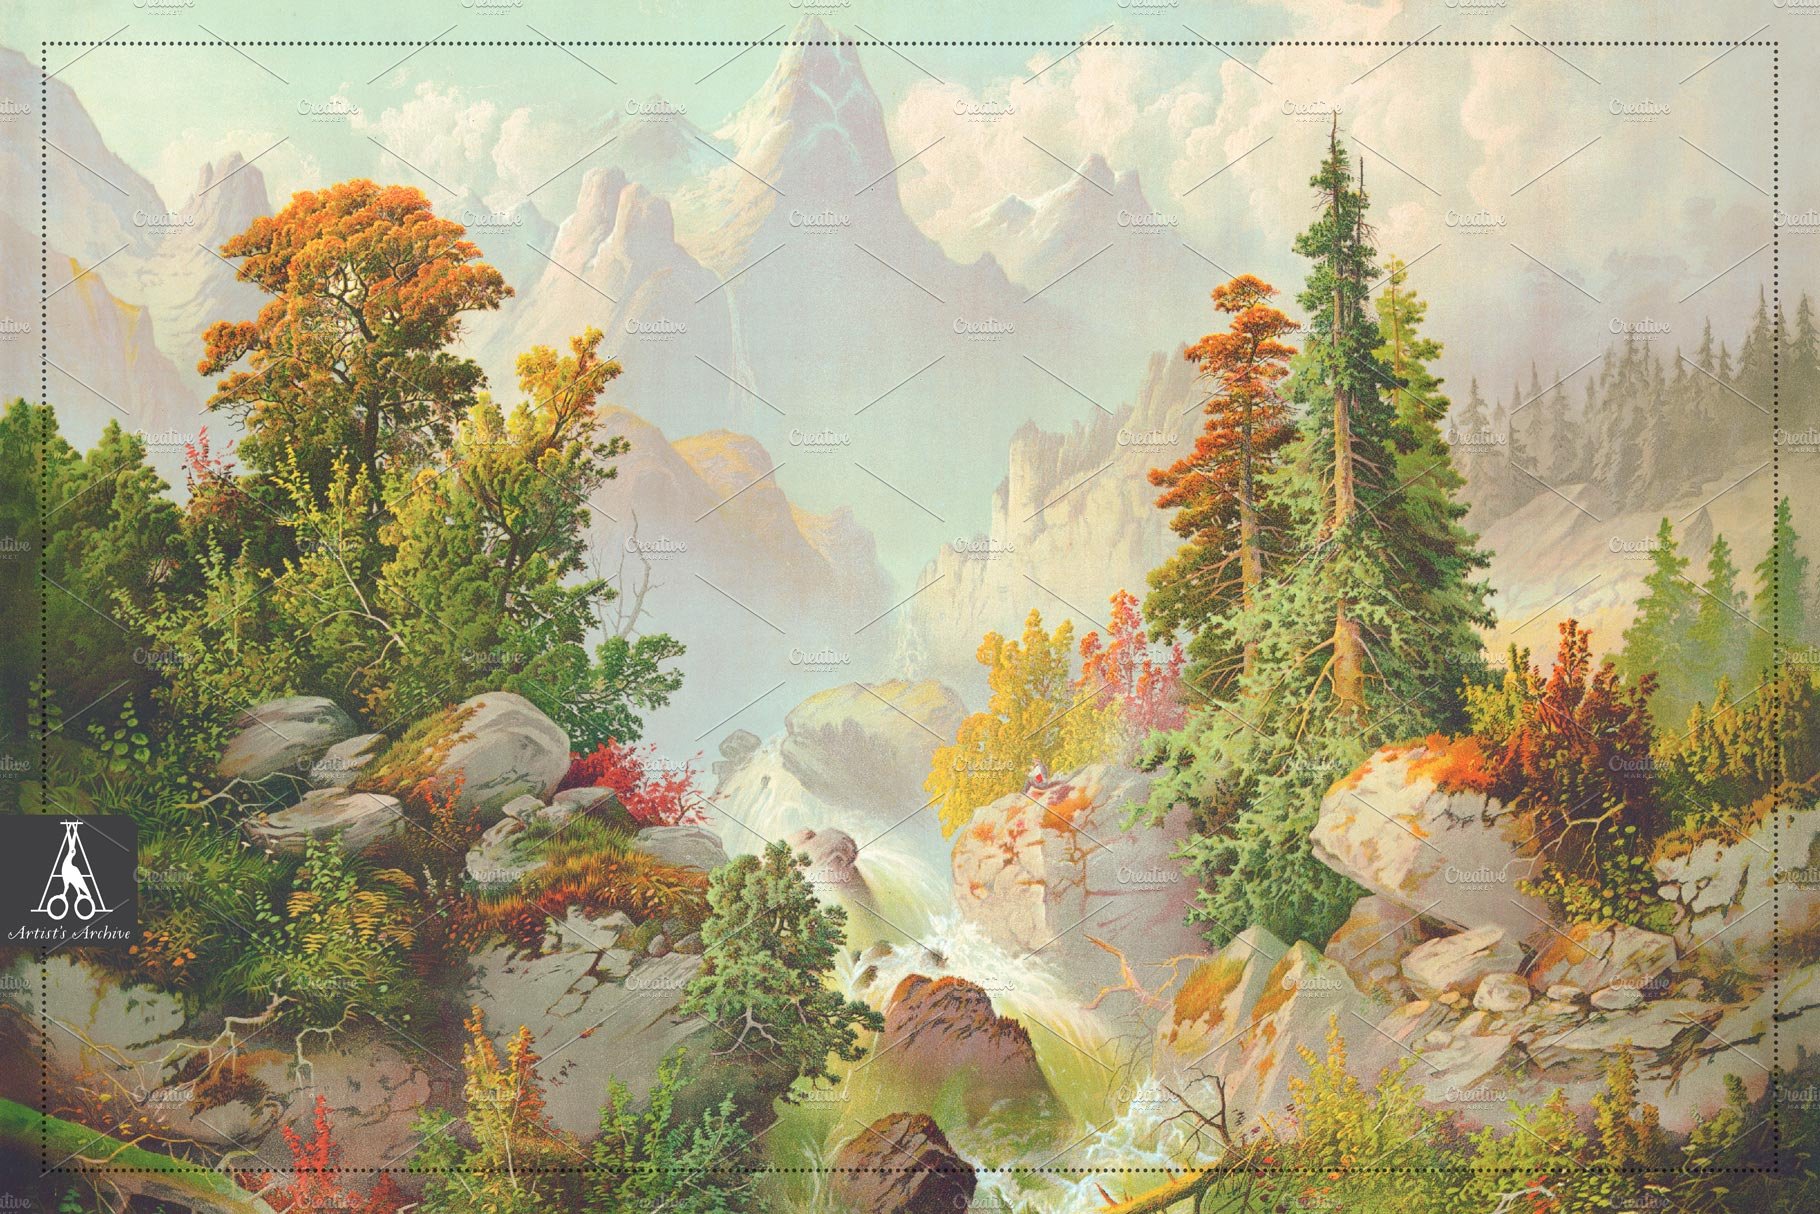 Painting of a mountain scene with trees and rocks.